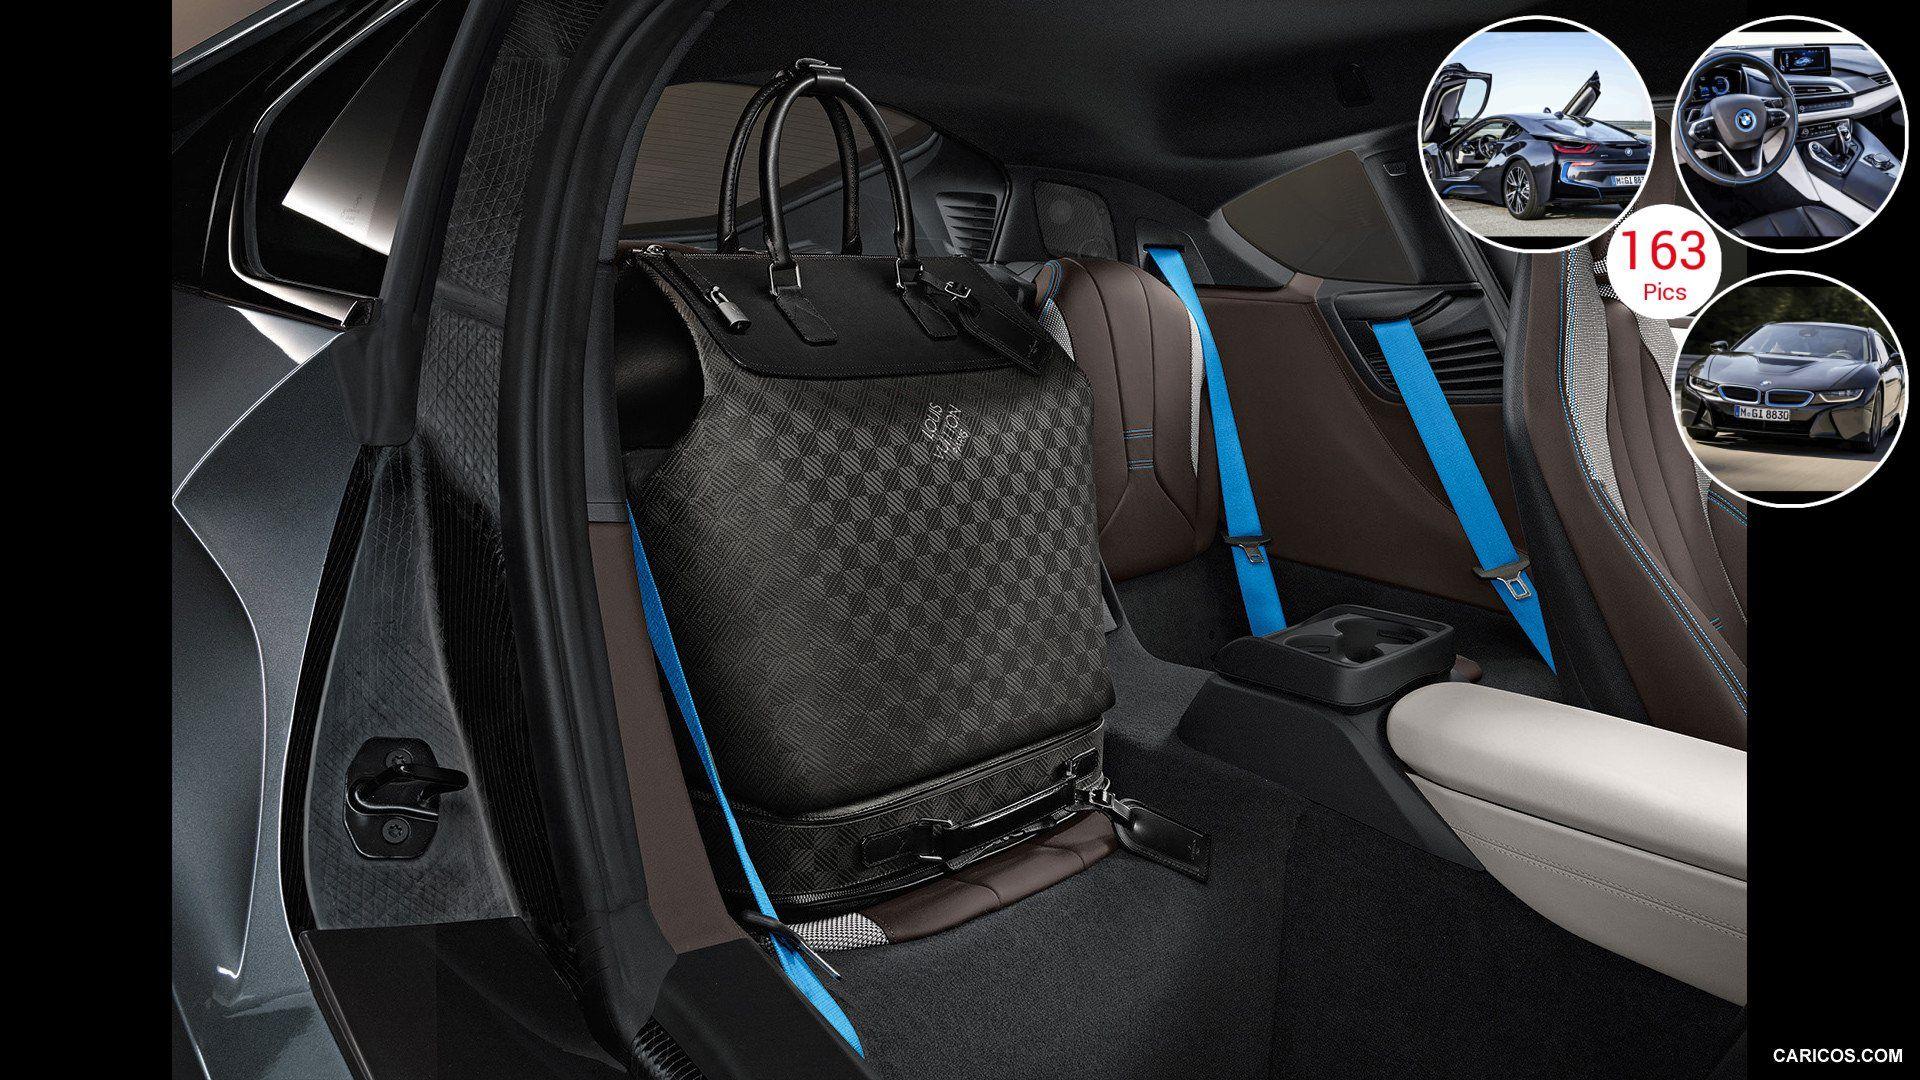 BMW i8 Coupe Vuitton Luggage. HD Wallpaper